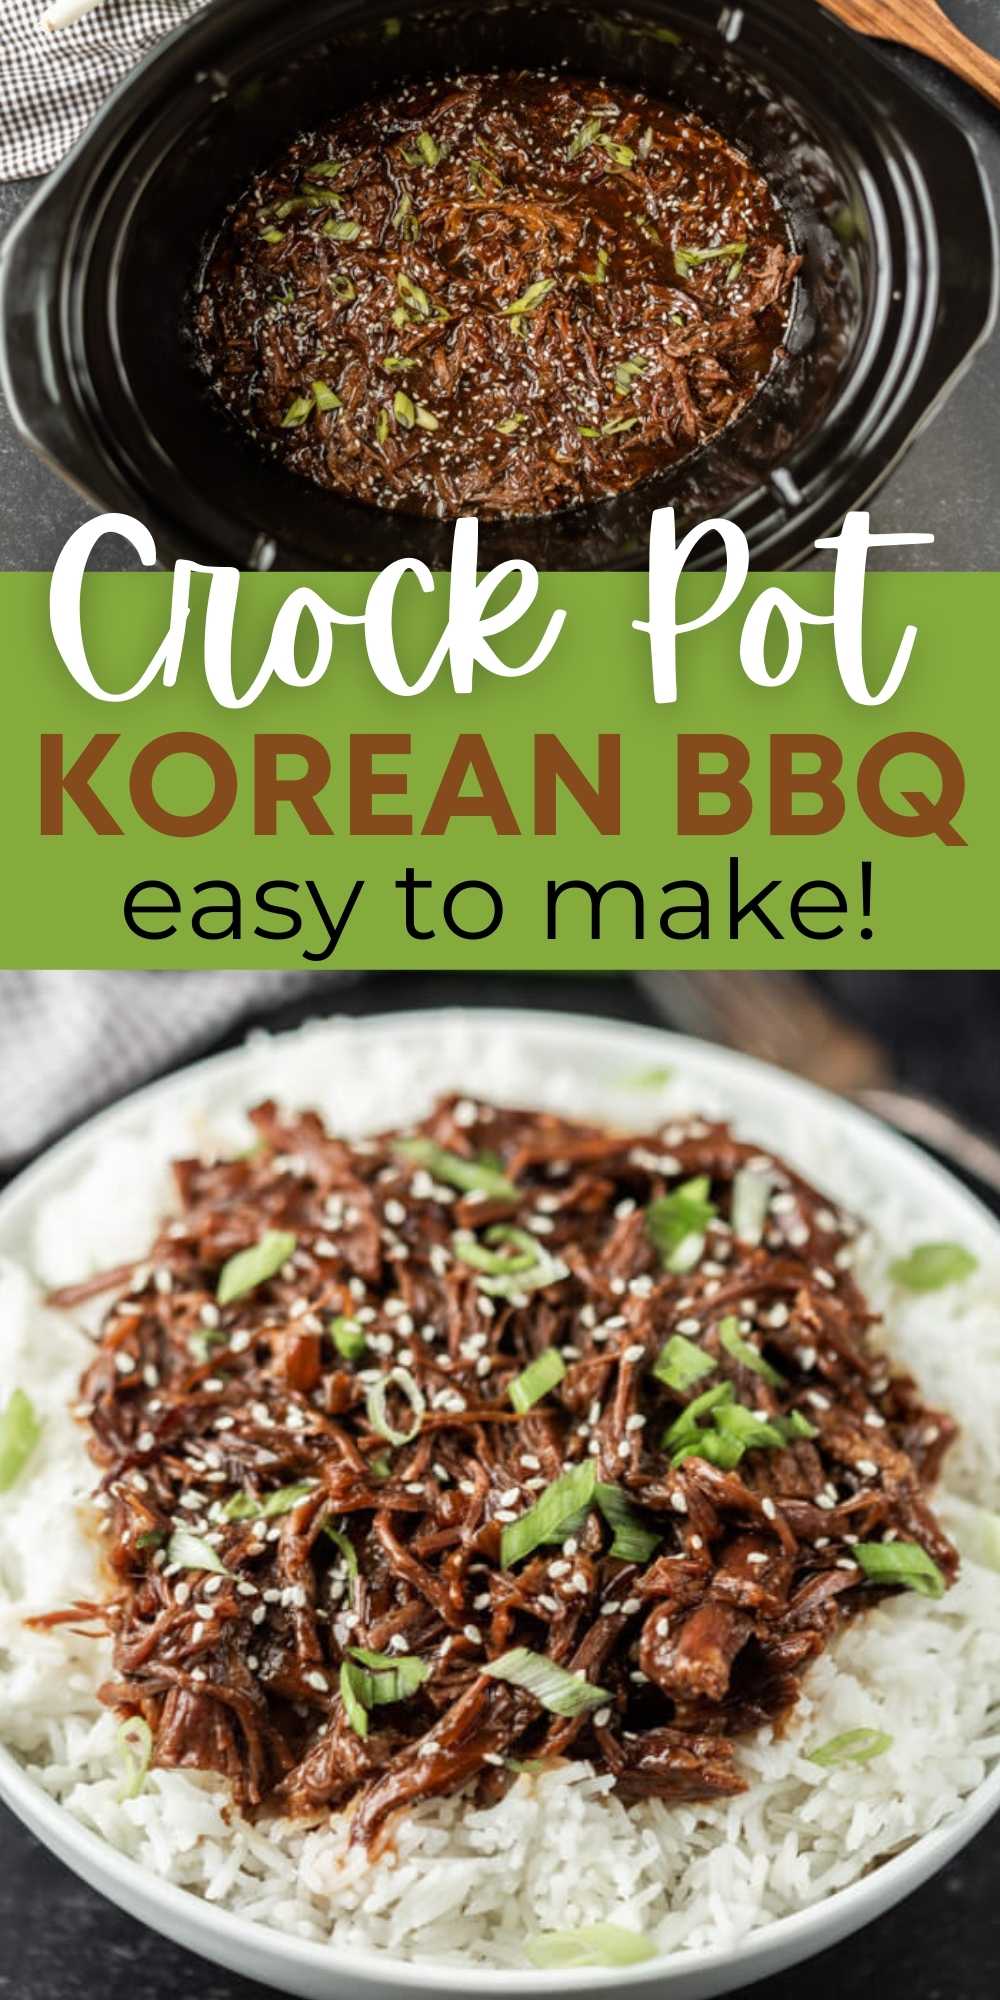 You are going to love this crock pot korean bbq recipe! Serve this slow cooker korean bbq beef over rice and a side of veggies for a simple meal! This is an easy to make slow cooker recipe that is delicious too!  #eatingonadime #crockpotrecipes #slowcookerrecipes #beefrecipes #koreanbbq 
